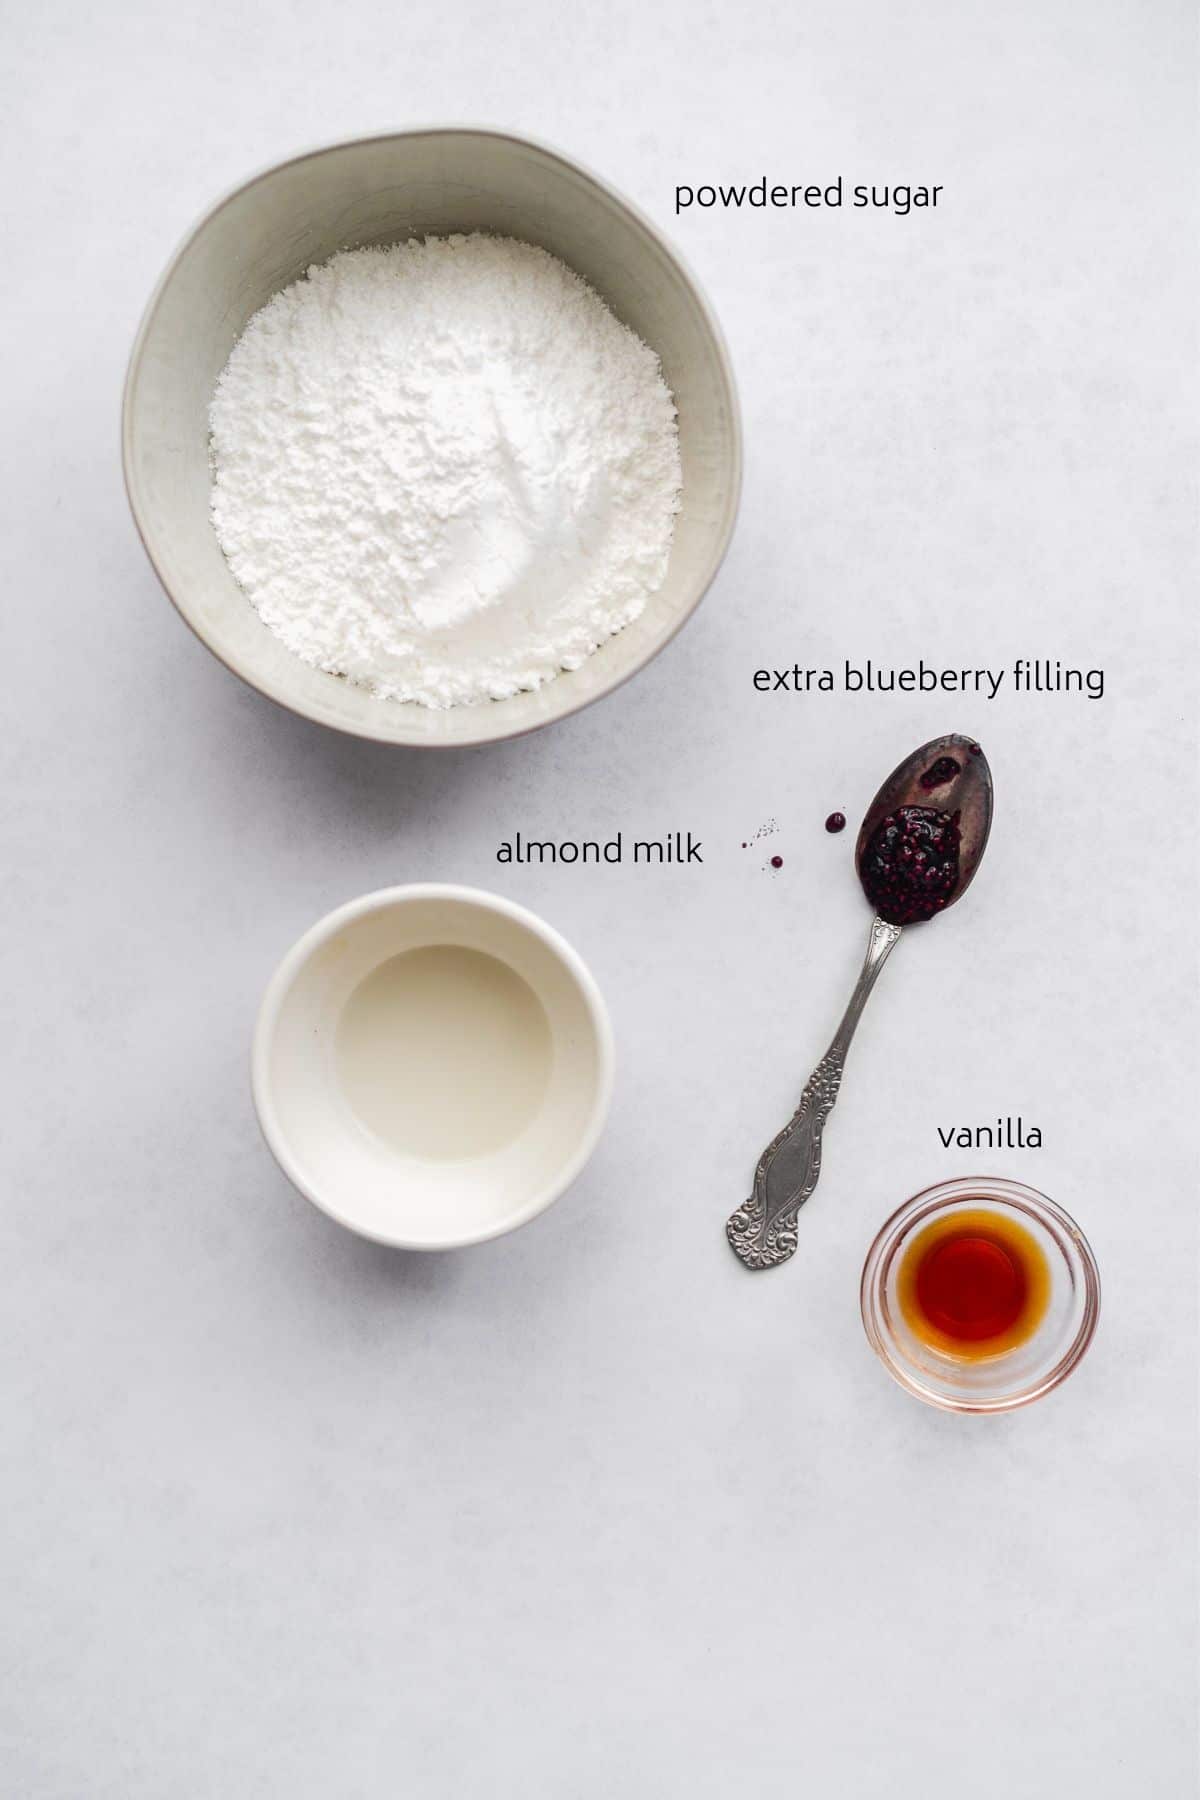 Blueberry filling ingredients on white surface.